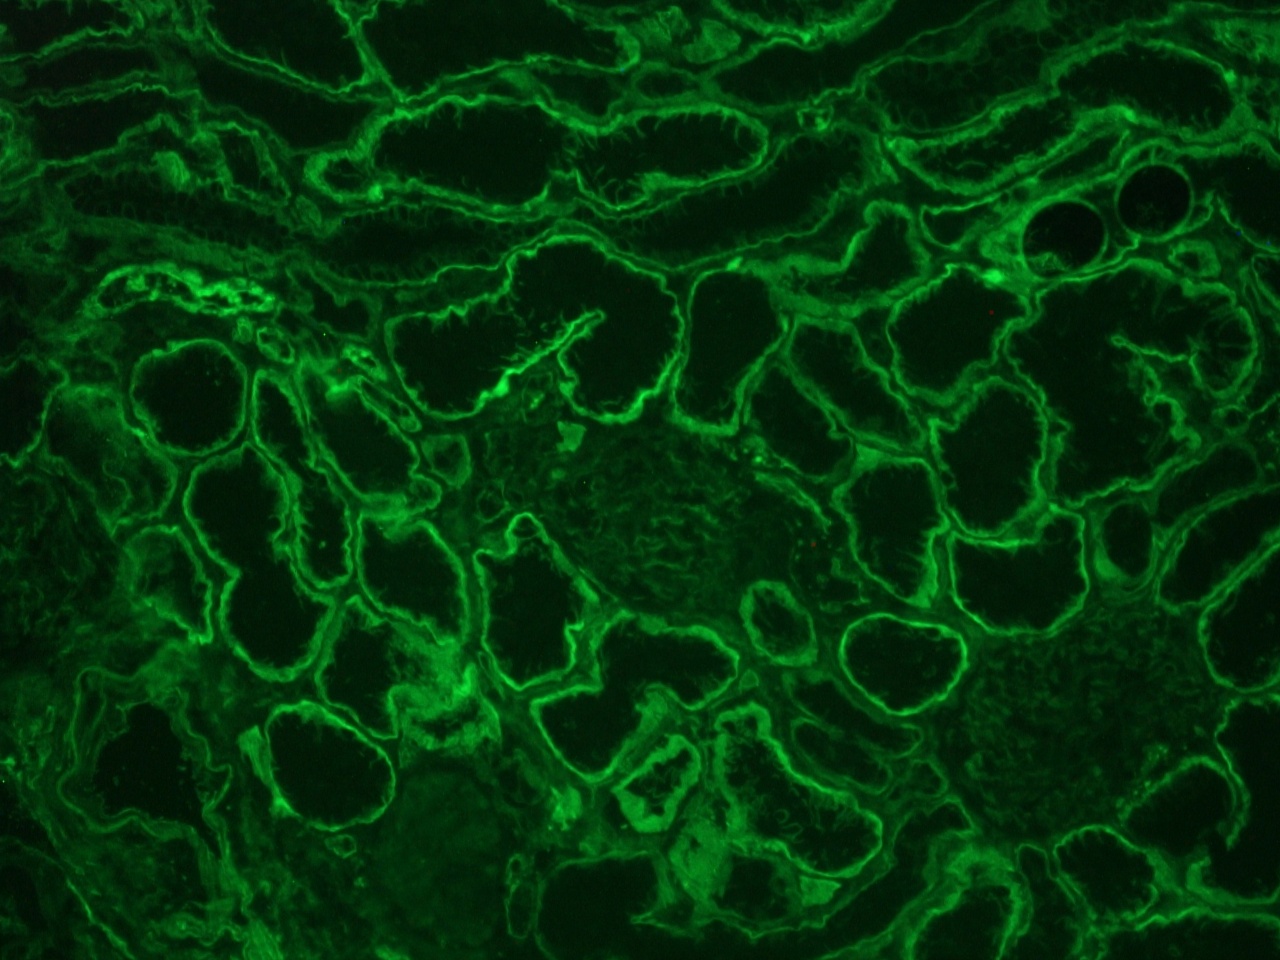 Figure 4: Integrin alpha 6A immunostaining of the basolateral membrane of epithelial cells in a frozen section of human kidney using MUB0908P.